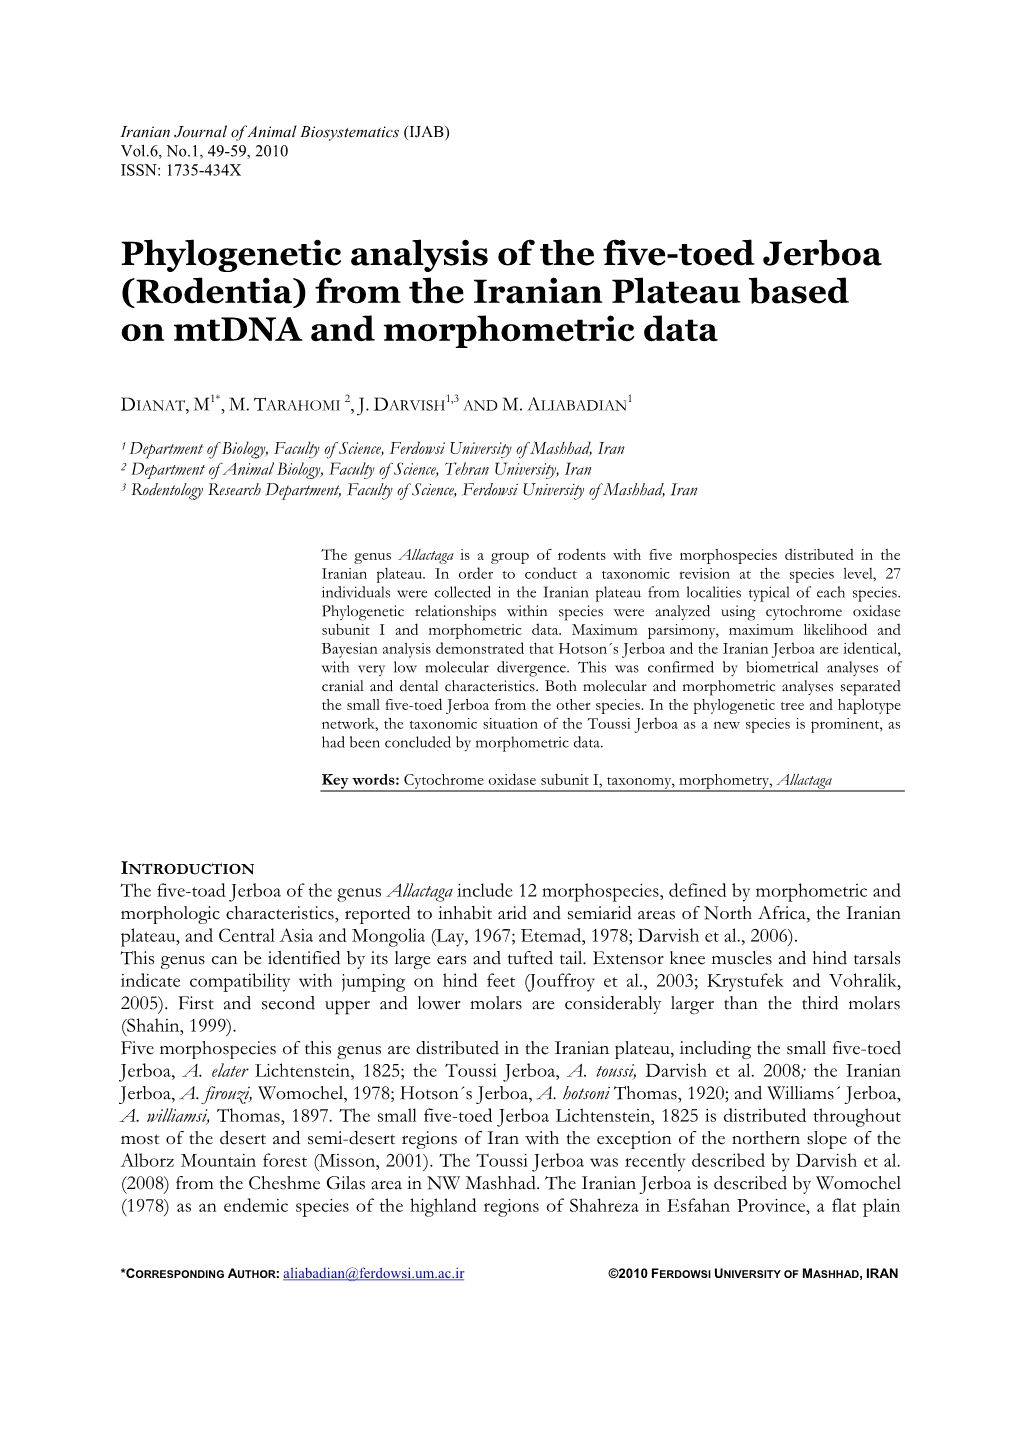 Phylogenetic Analysis of the Five-Toed Jerboa (Rodentia) from the Iranian Plateau Based on Mtdna and Morphometric Data